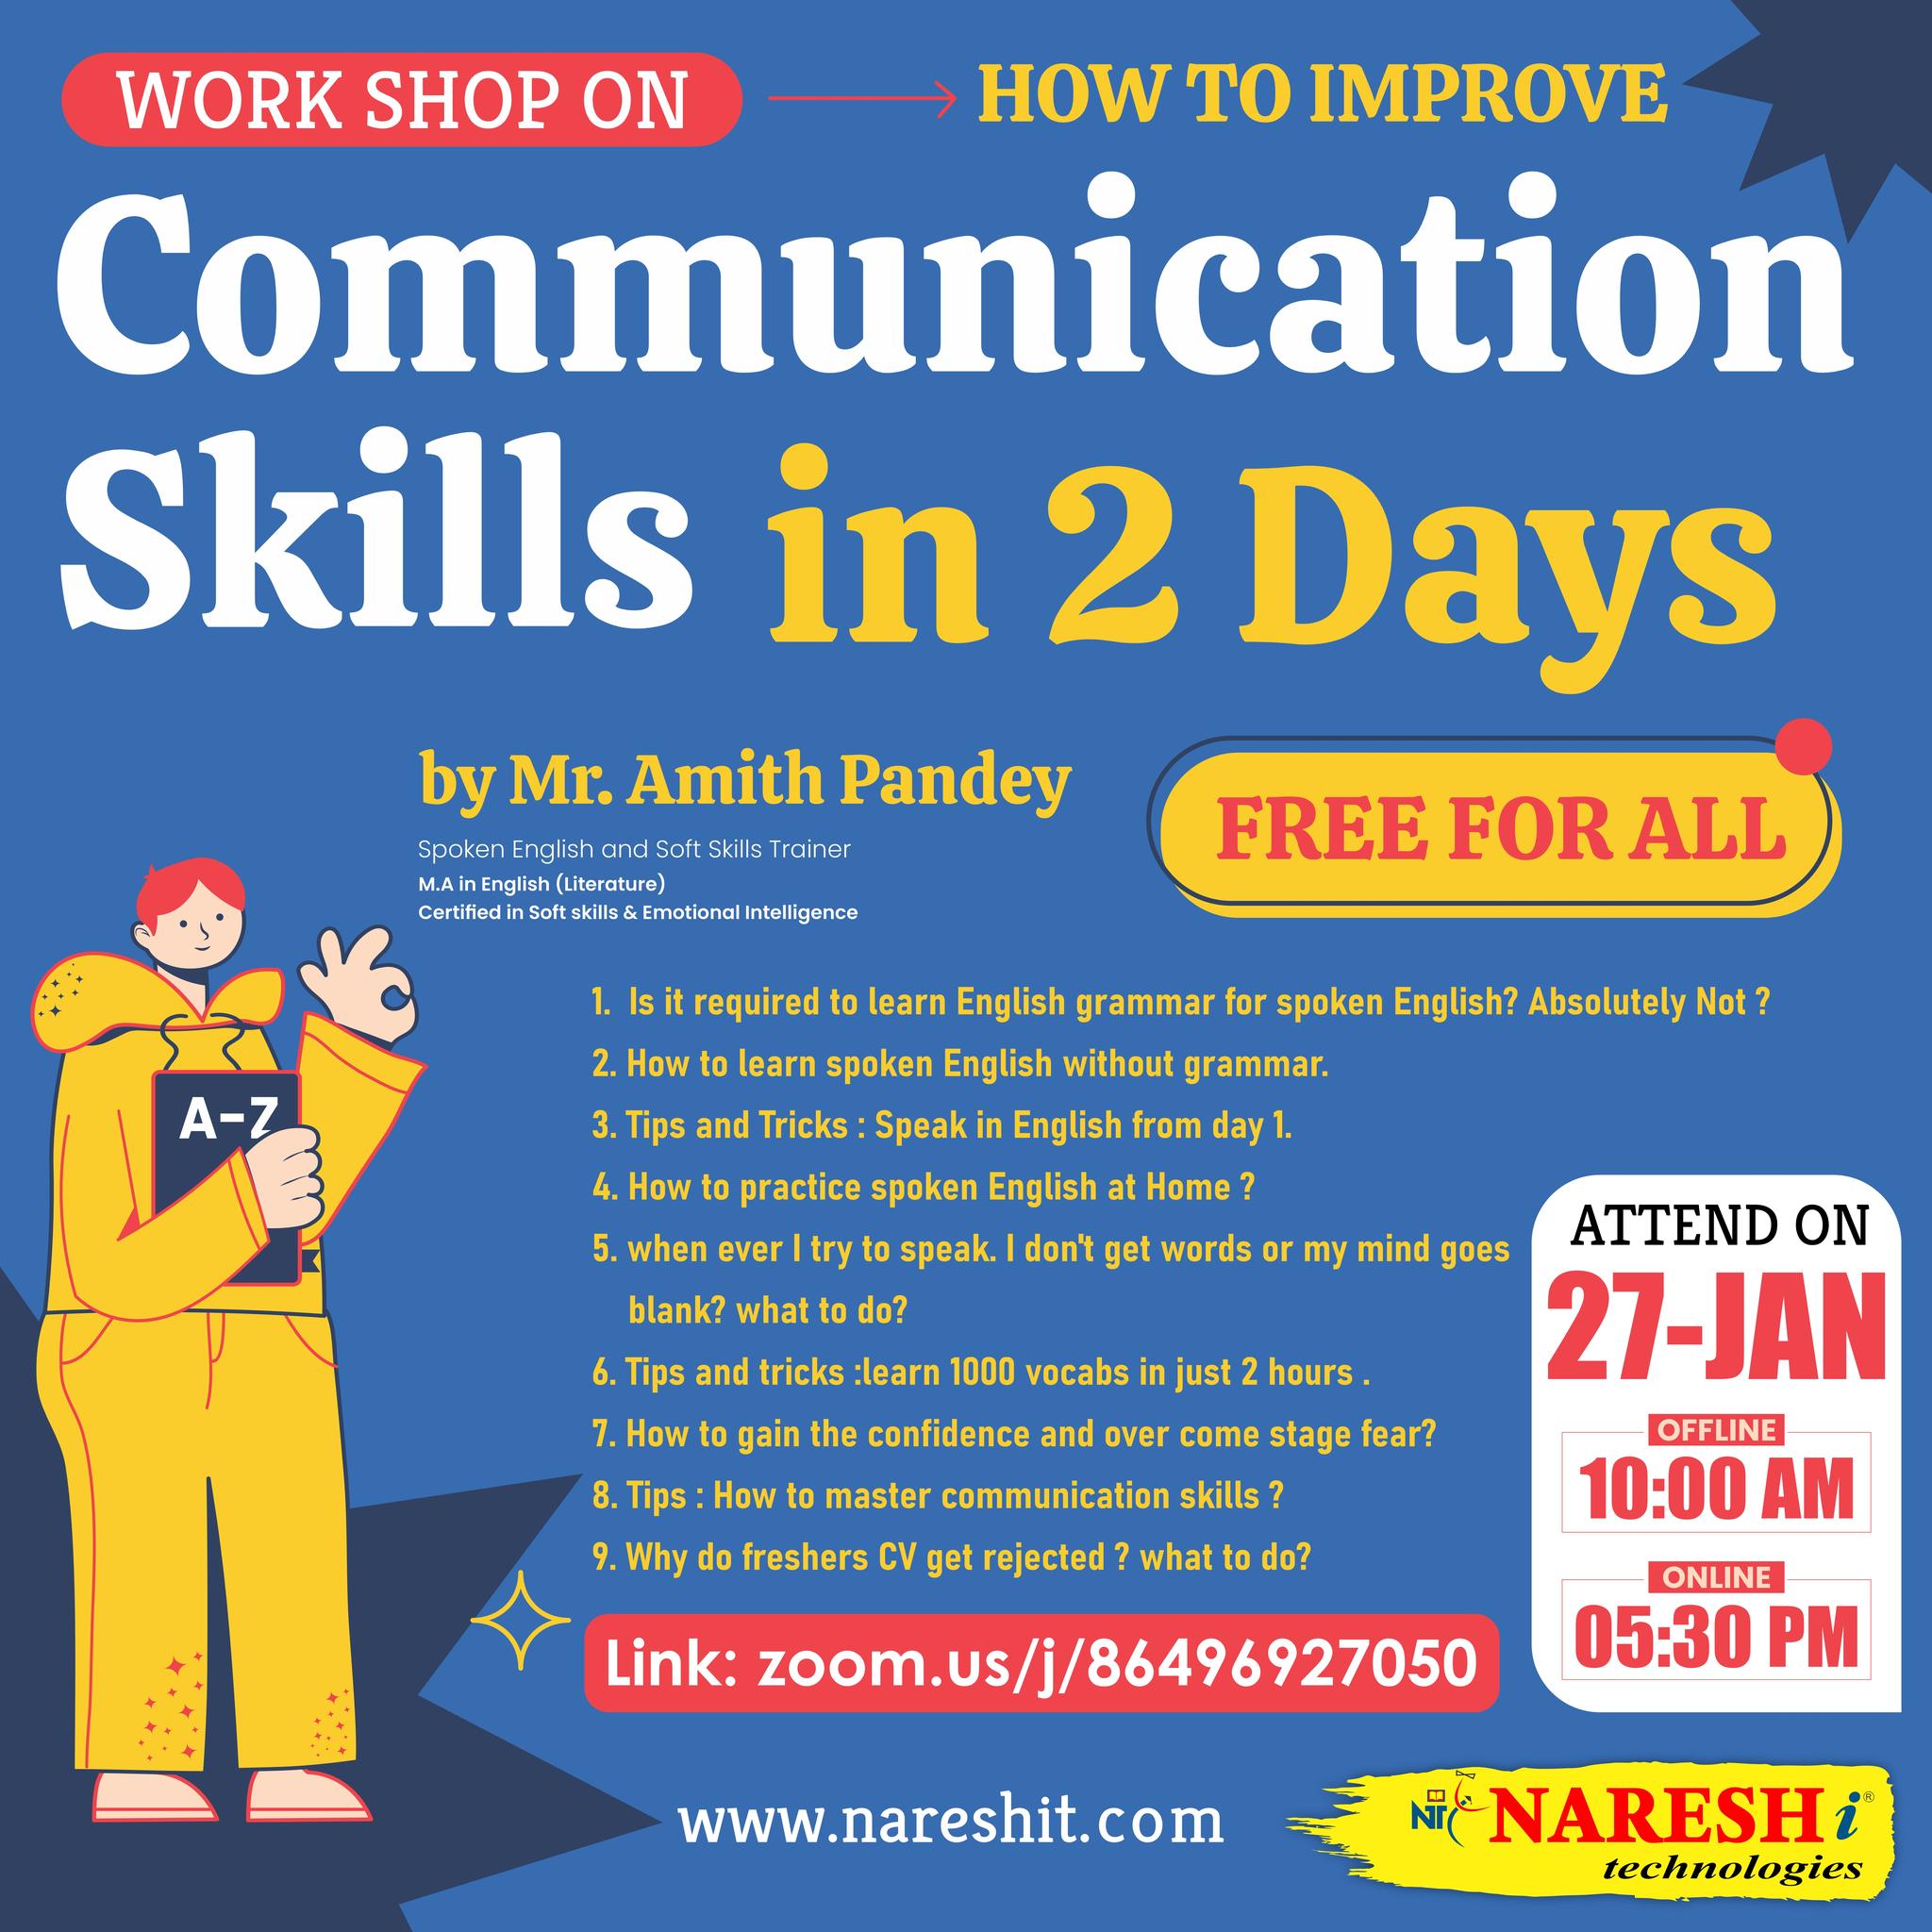 FREE Workshop on How to Improve Communication skills in NareshIT, Online Event